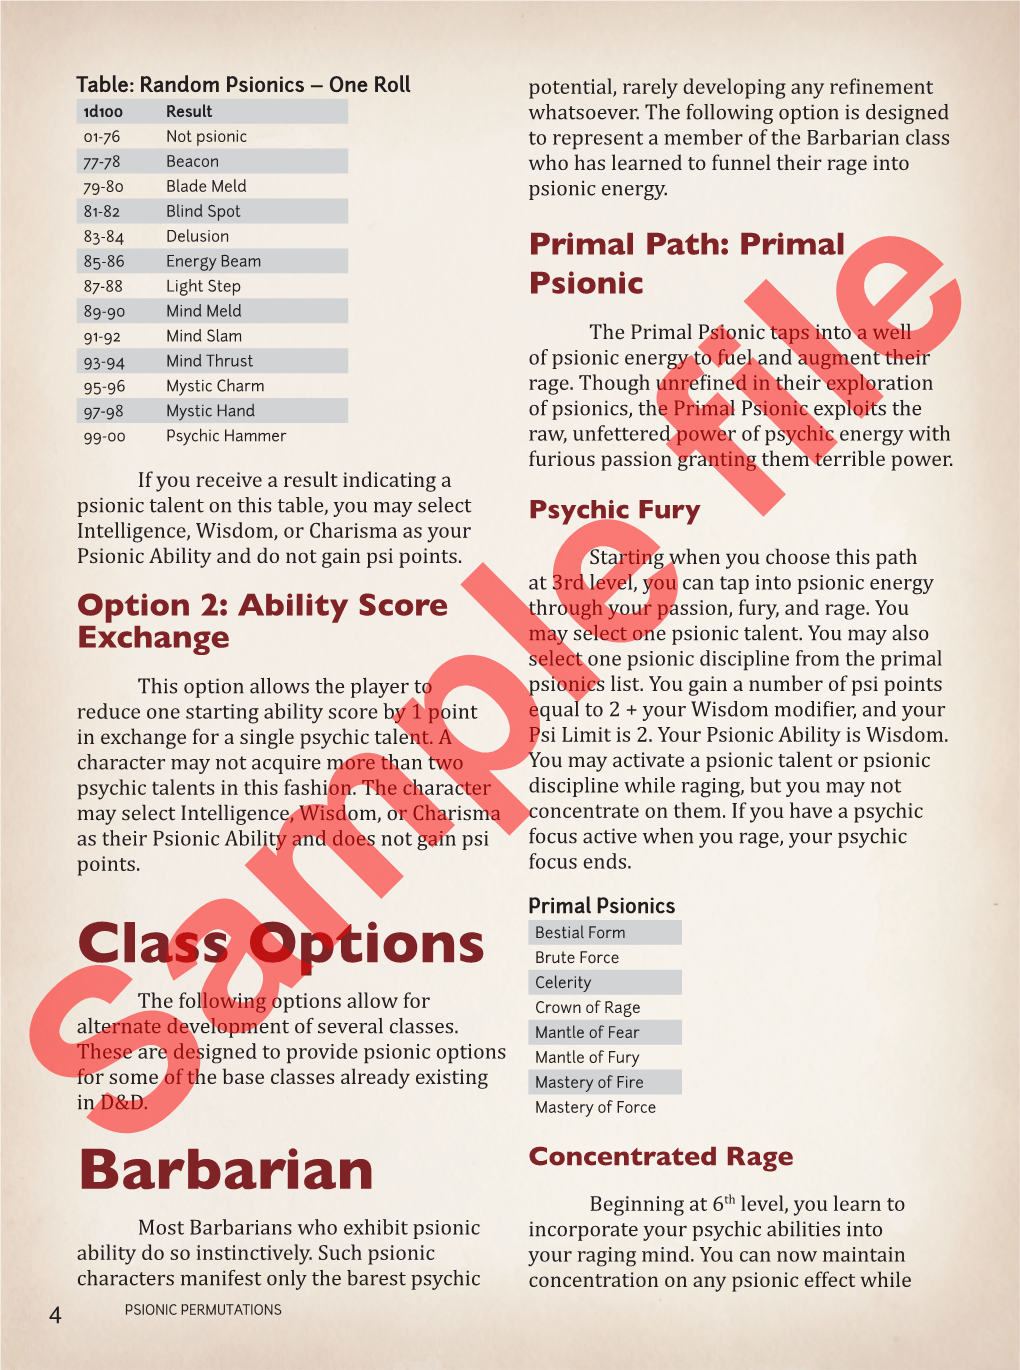 Class Options Barbarian